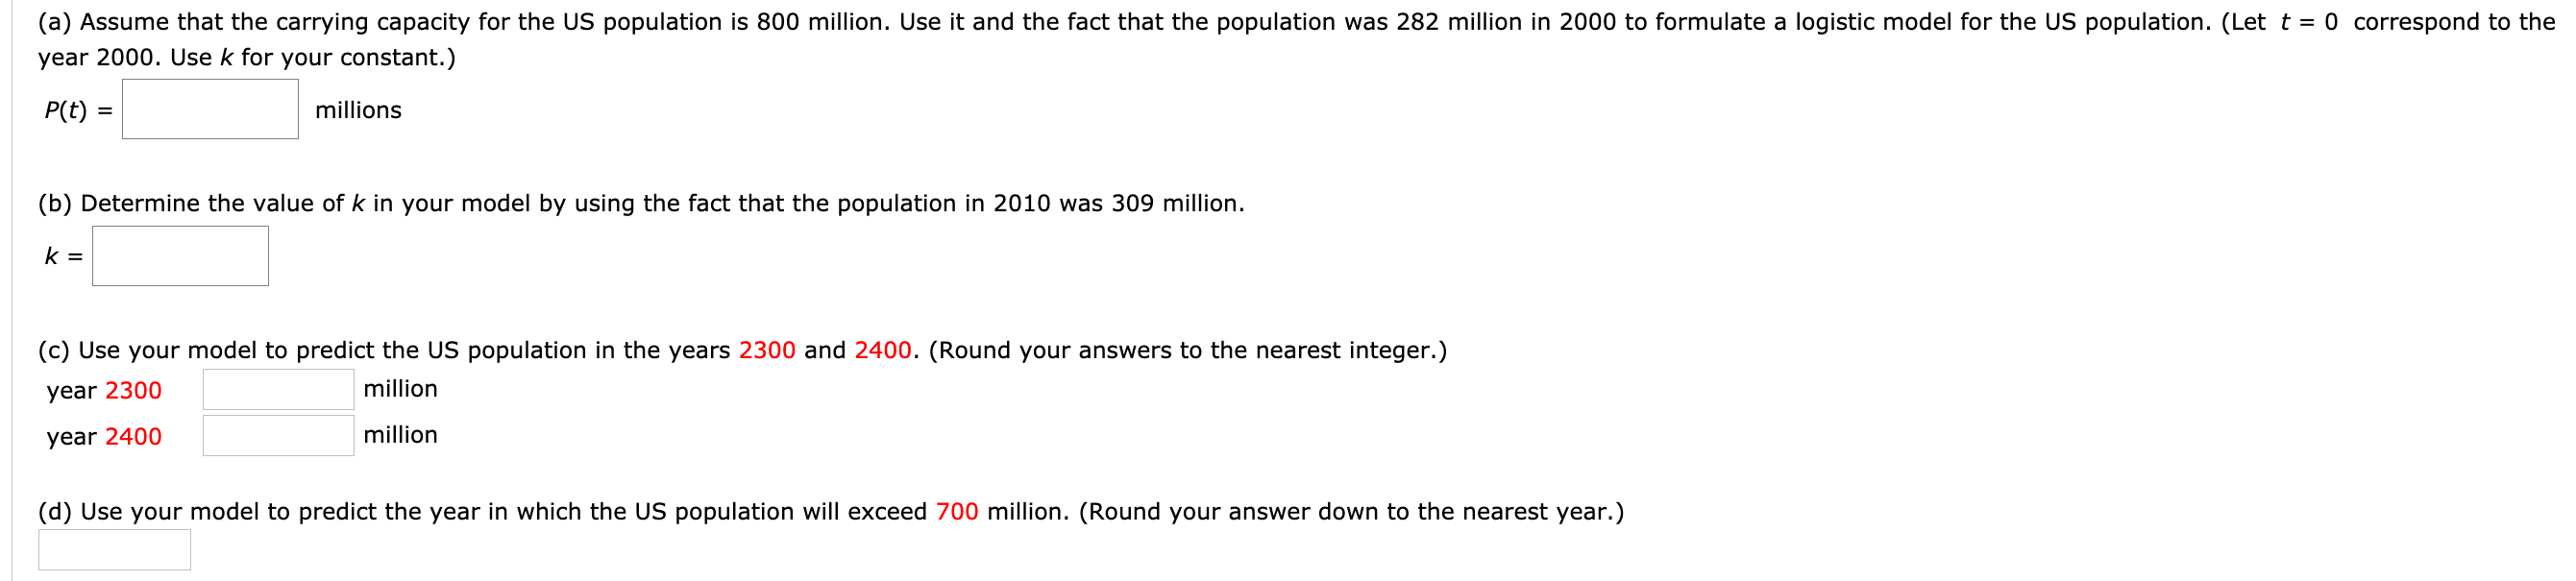 (a) Assume that the carrying capacity for the US population is 800 million. Use it and the fact that the population was 282 million in 2000 to formulate a logistic model for the US population. (Let t = 0 correspond to the
year 2000. Use k for your constant.)
P(t) =
millions
%3D
(b) Determine the value of k in your model by using the fact that the population in 2010 was 309 million.
k =
(c) Use your model to predict the US population in the years 2300 and 2400. (Round your answers to the nearest integer.)
year 2300
million
year 2400
million
(d) Use your model to predict the year in which the US population will exceed 700 million. (Round your answer down to the nearest year.)
